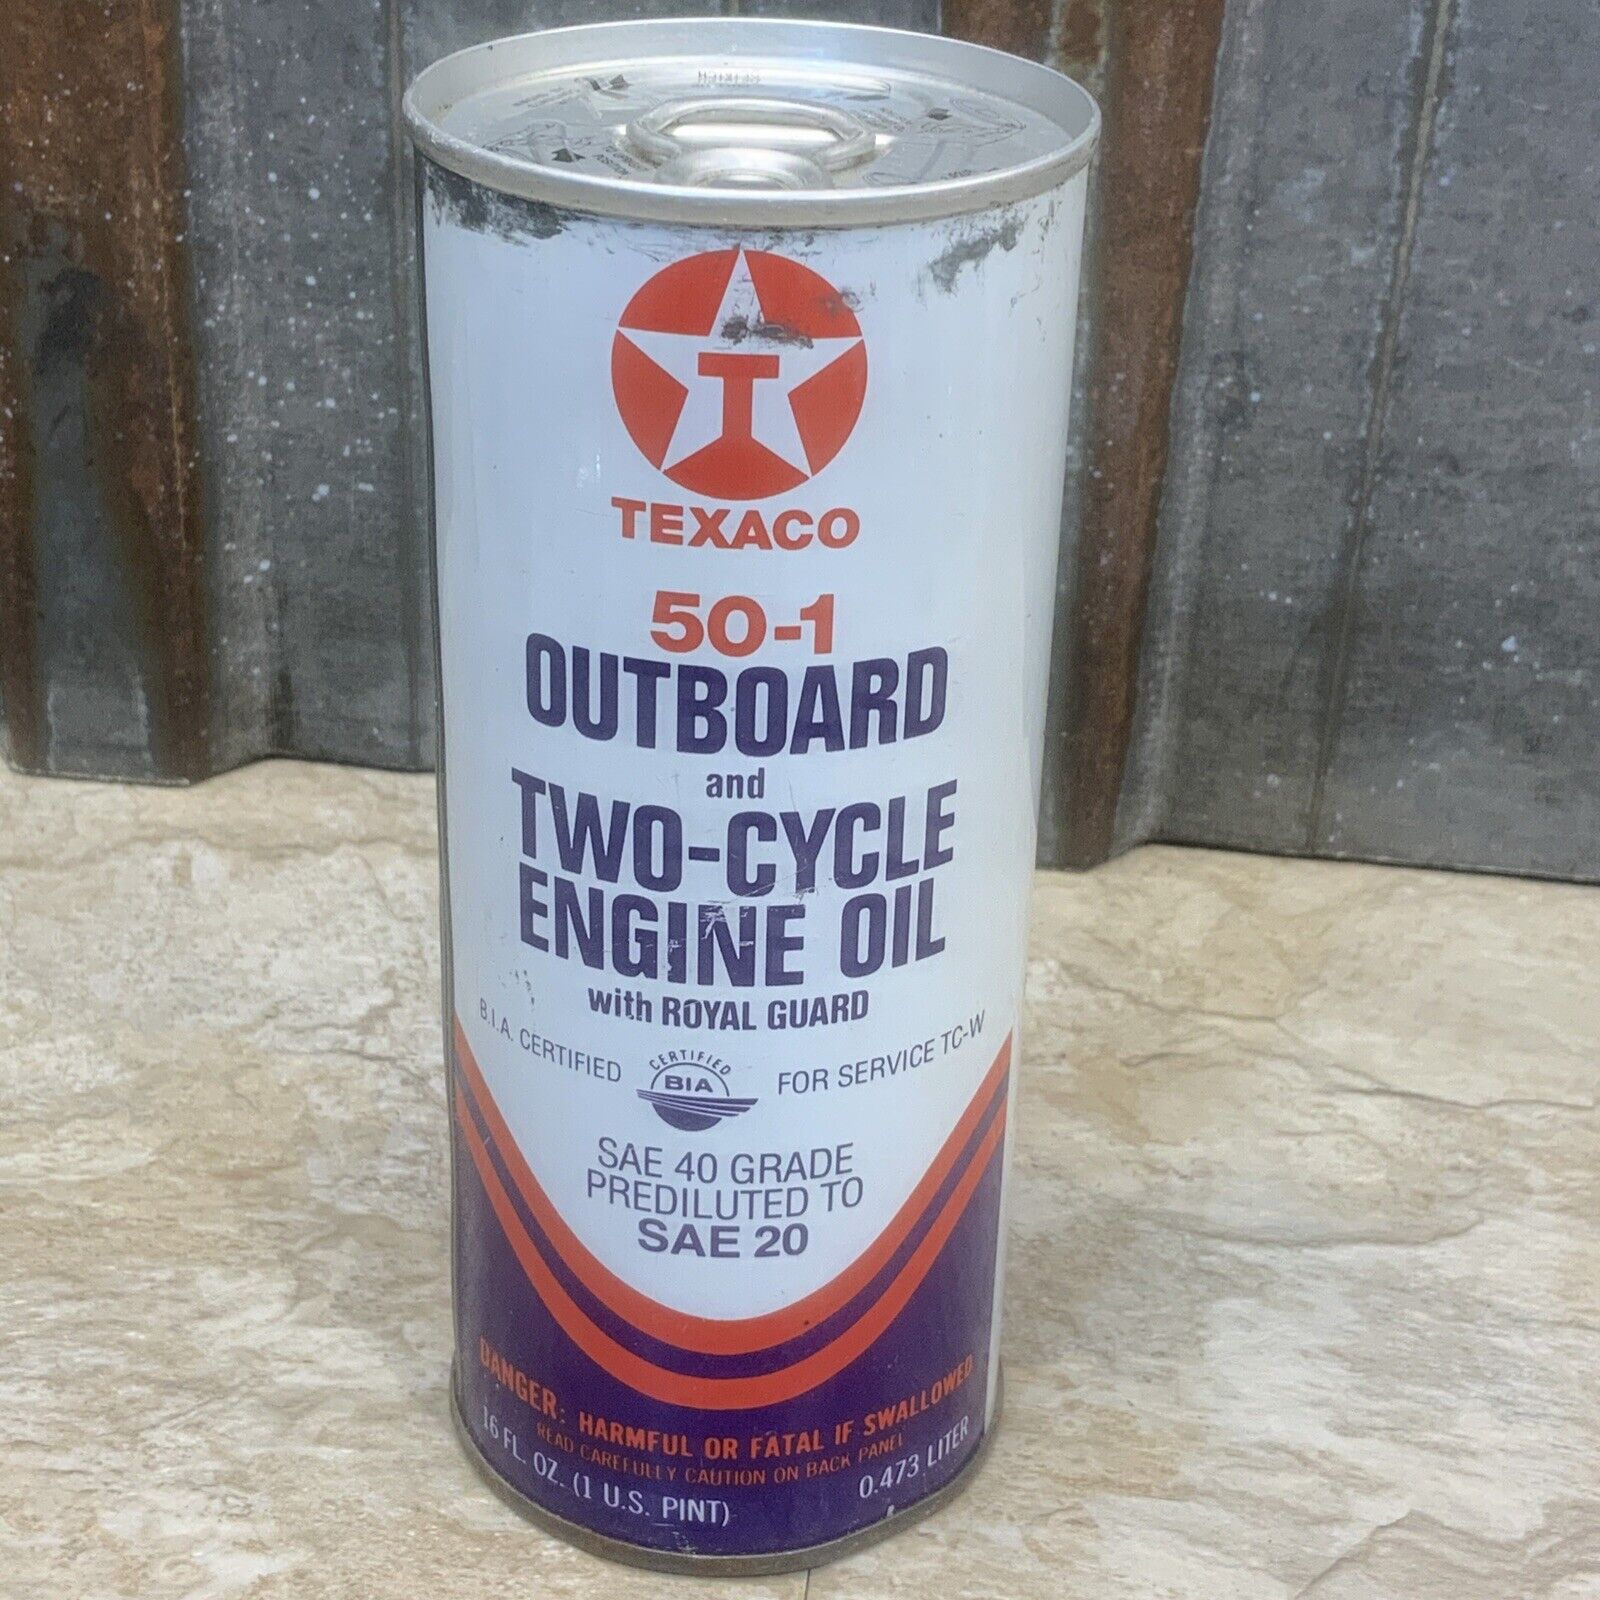 1 Vintage Texaco 50-1 Outboard Motor Oil Cans Full NOS Chainsaw Snowmobile Can